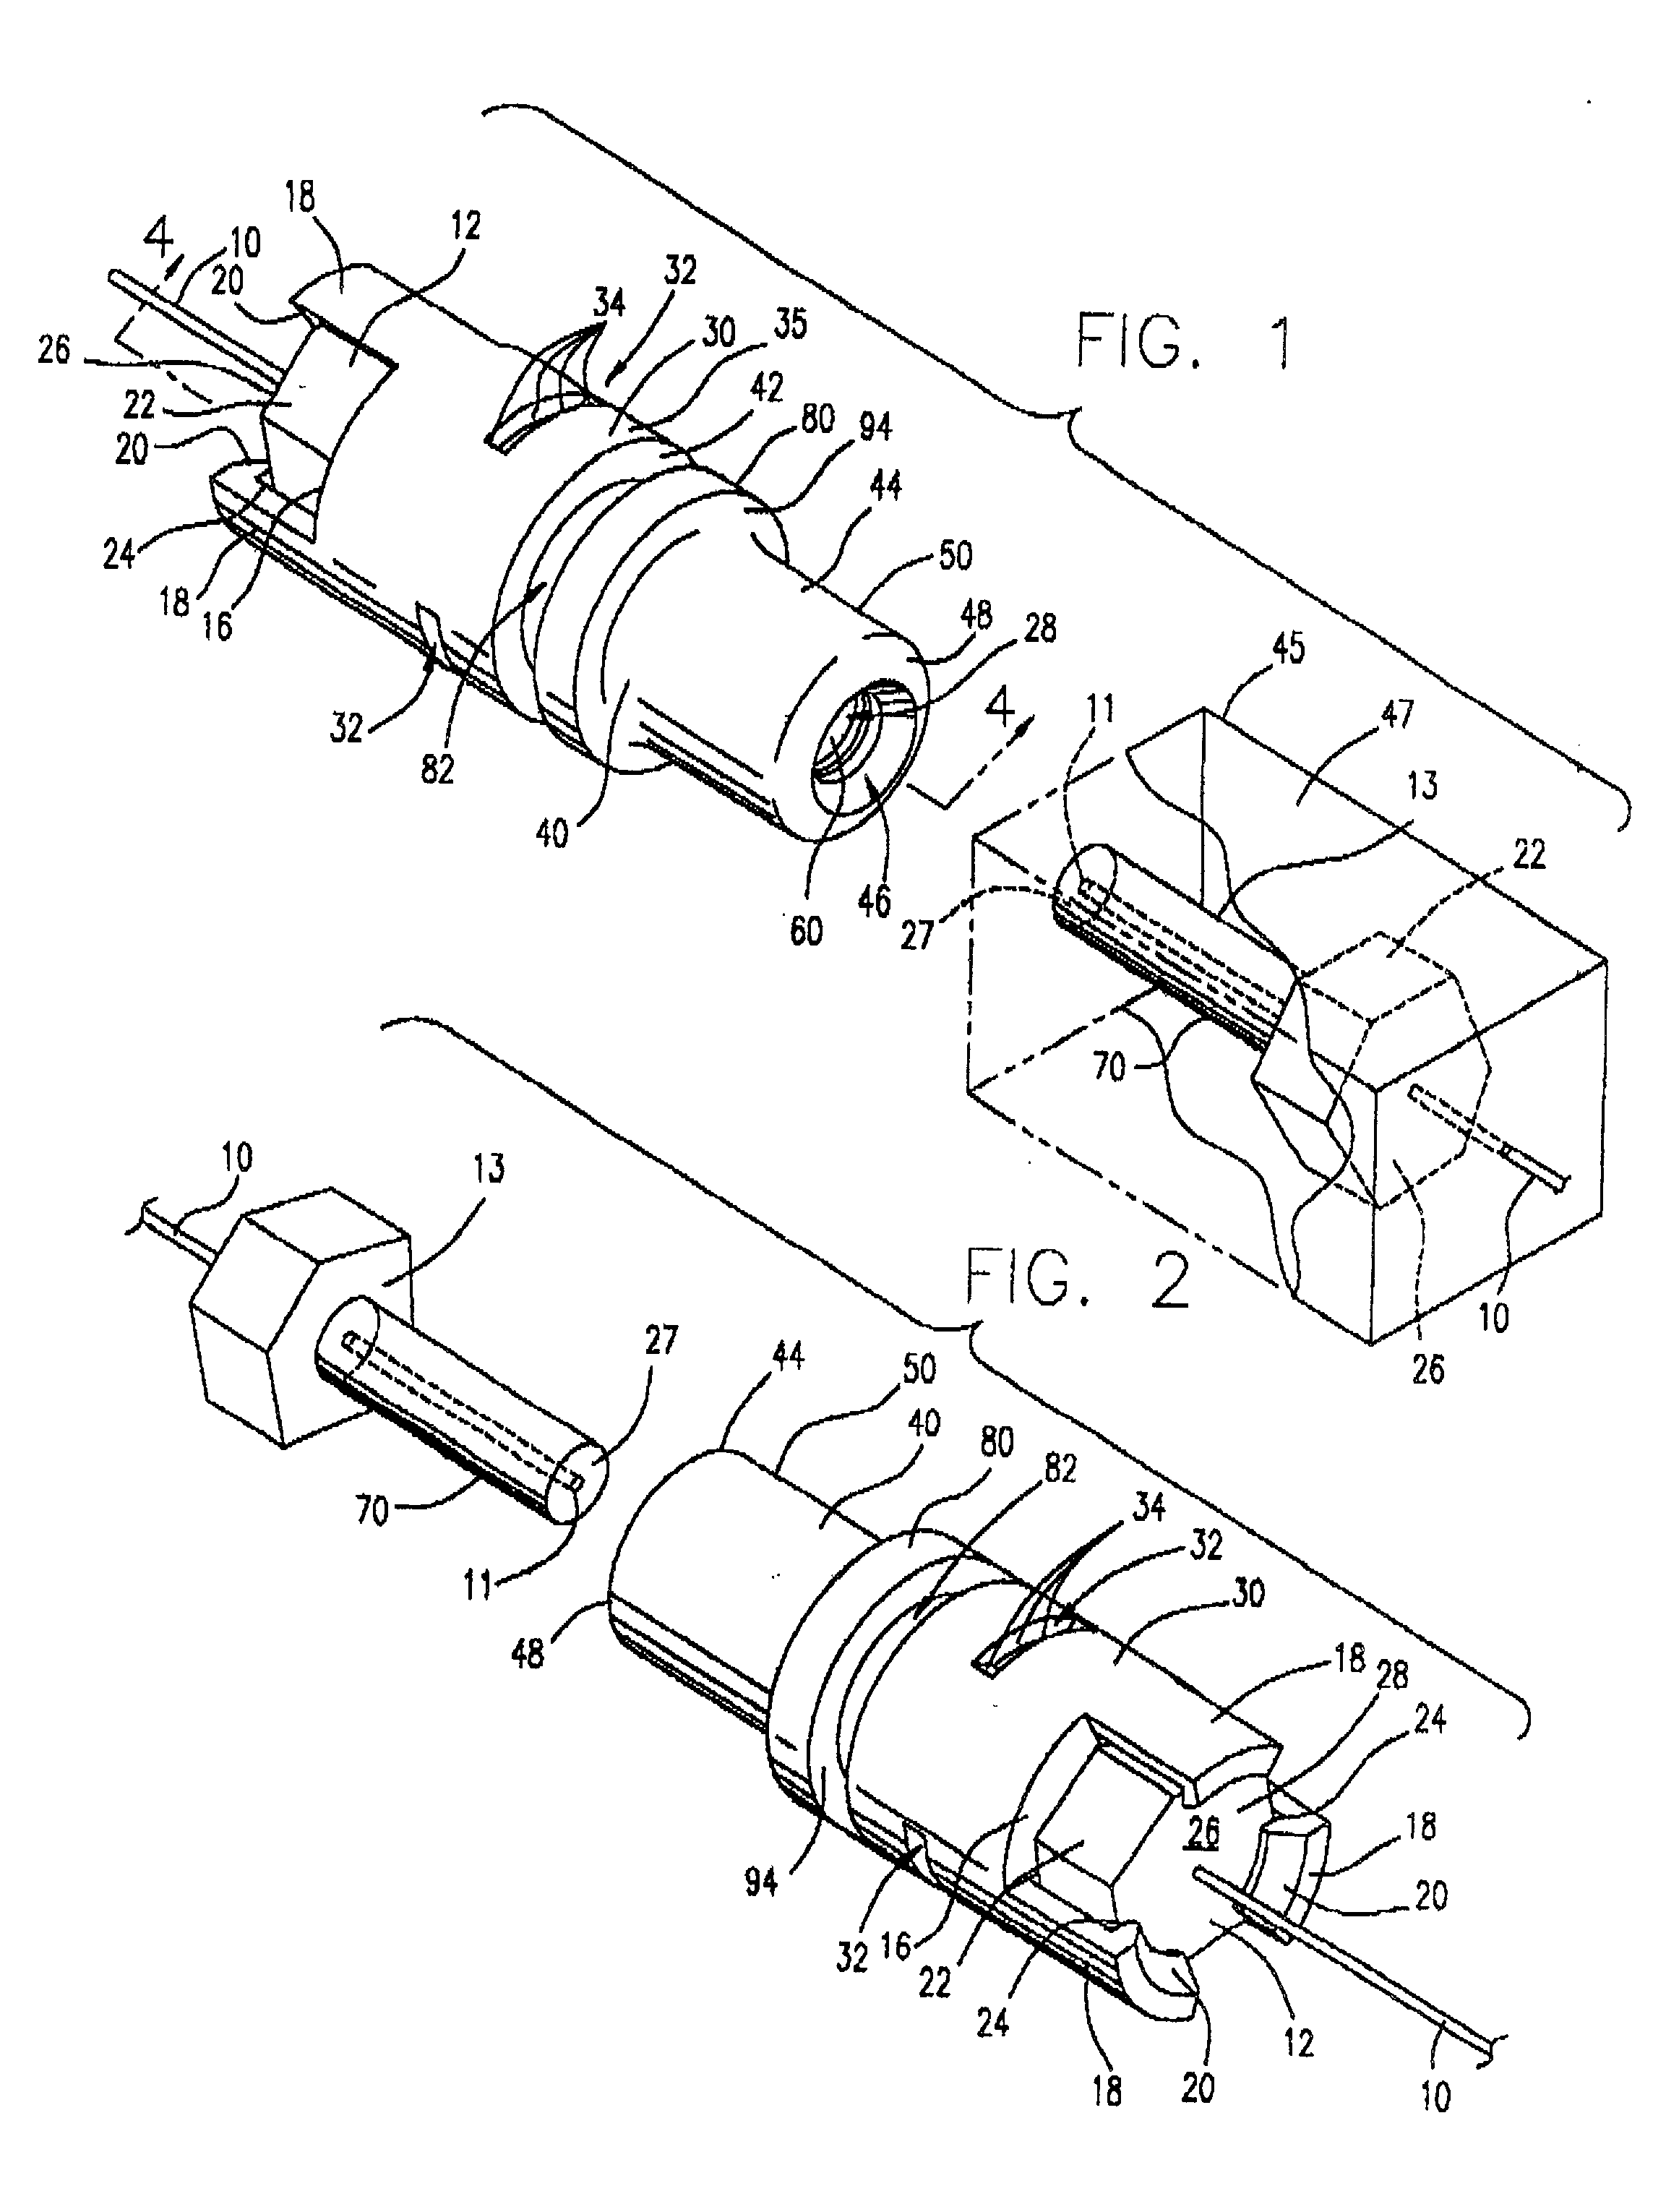 Optical fiber coupler and an optical fiber coupler incorporated within a transceiver module